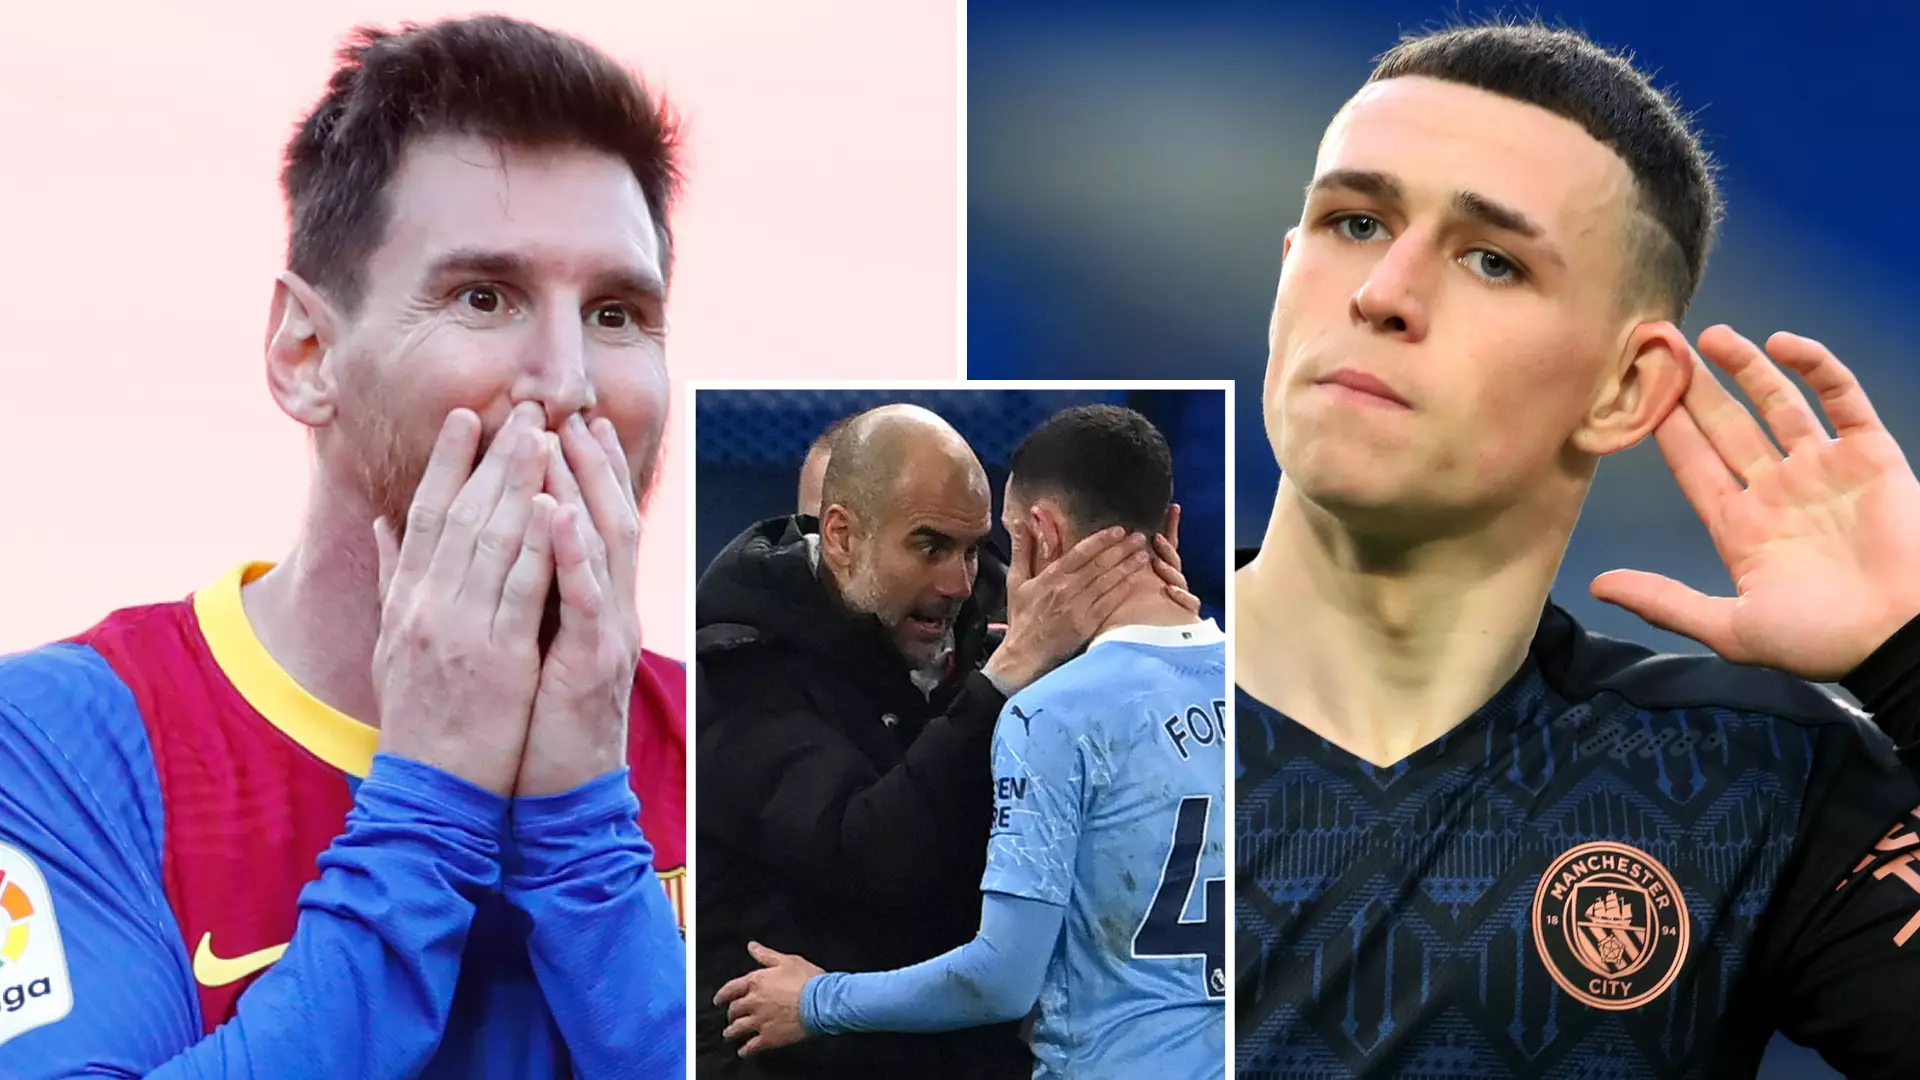 'Man City Star Phil Foden Is In The Same Category As Barcelona Captain Lionel Messi'